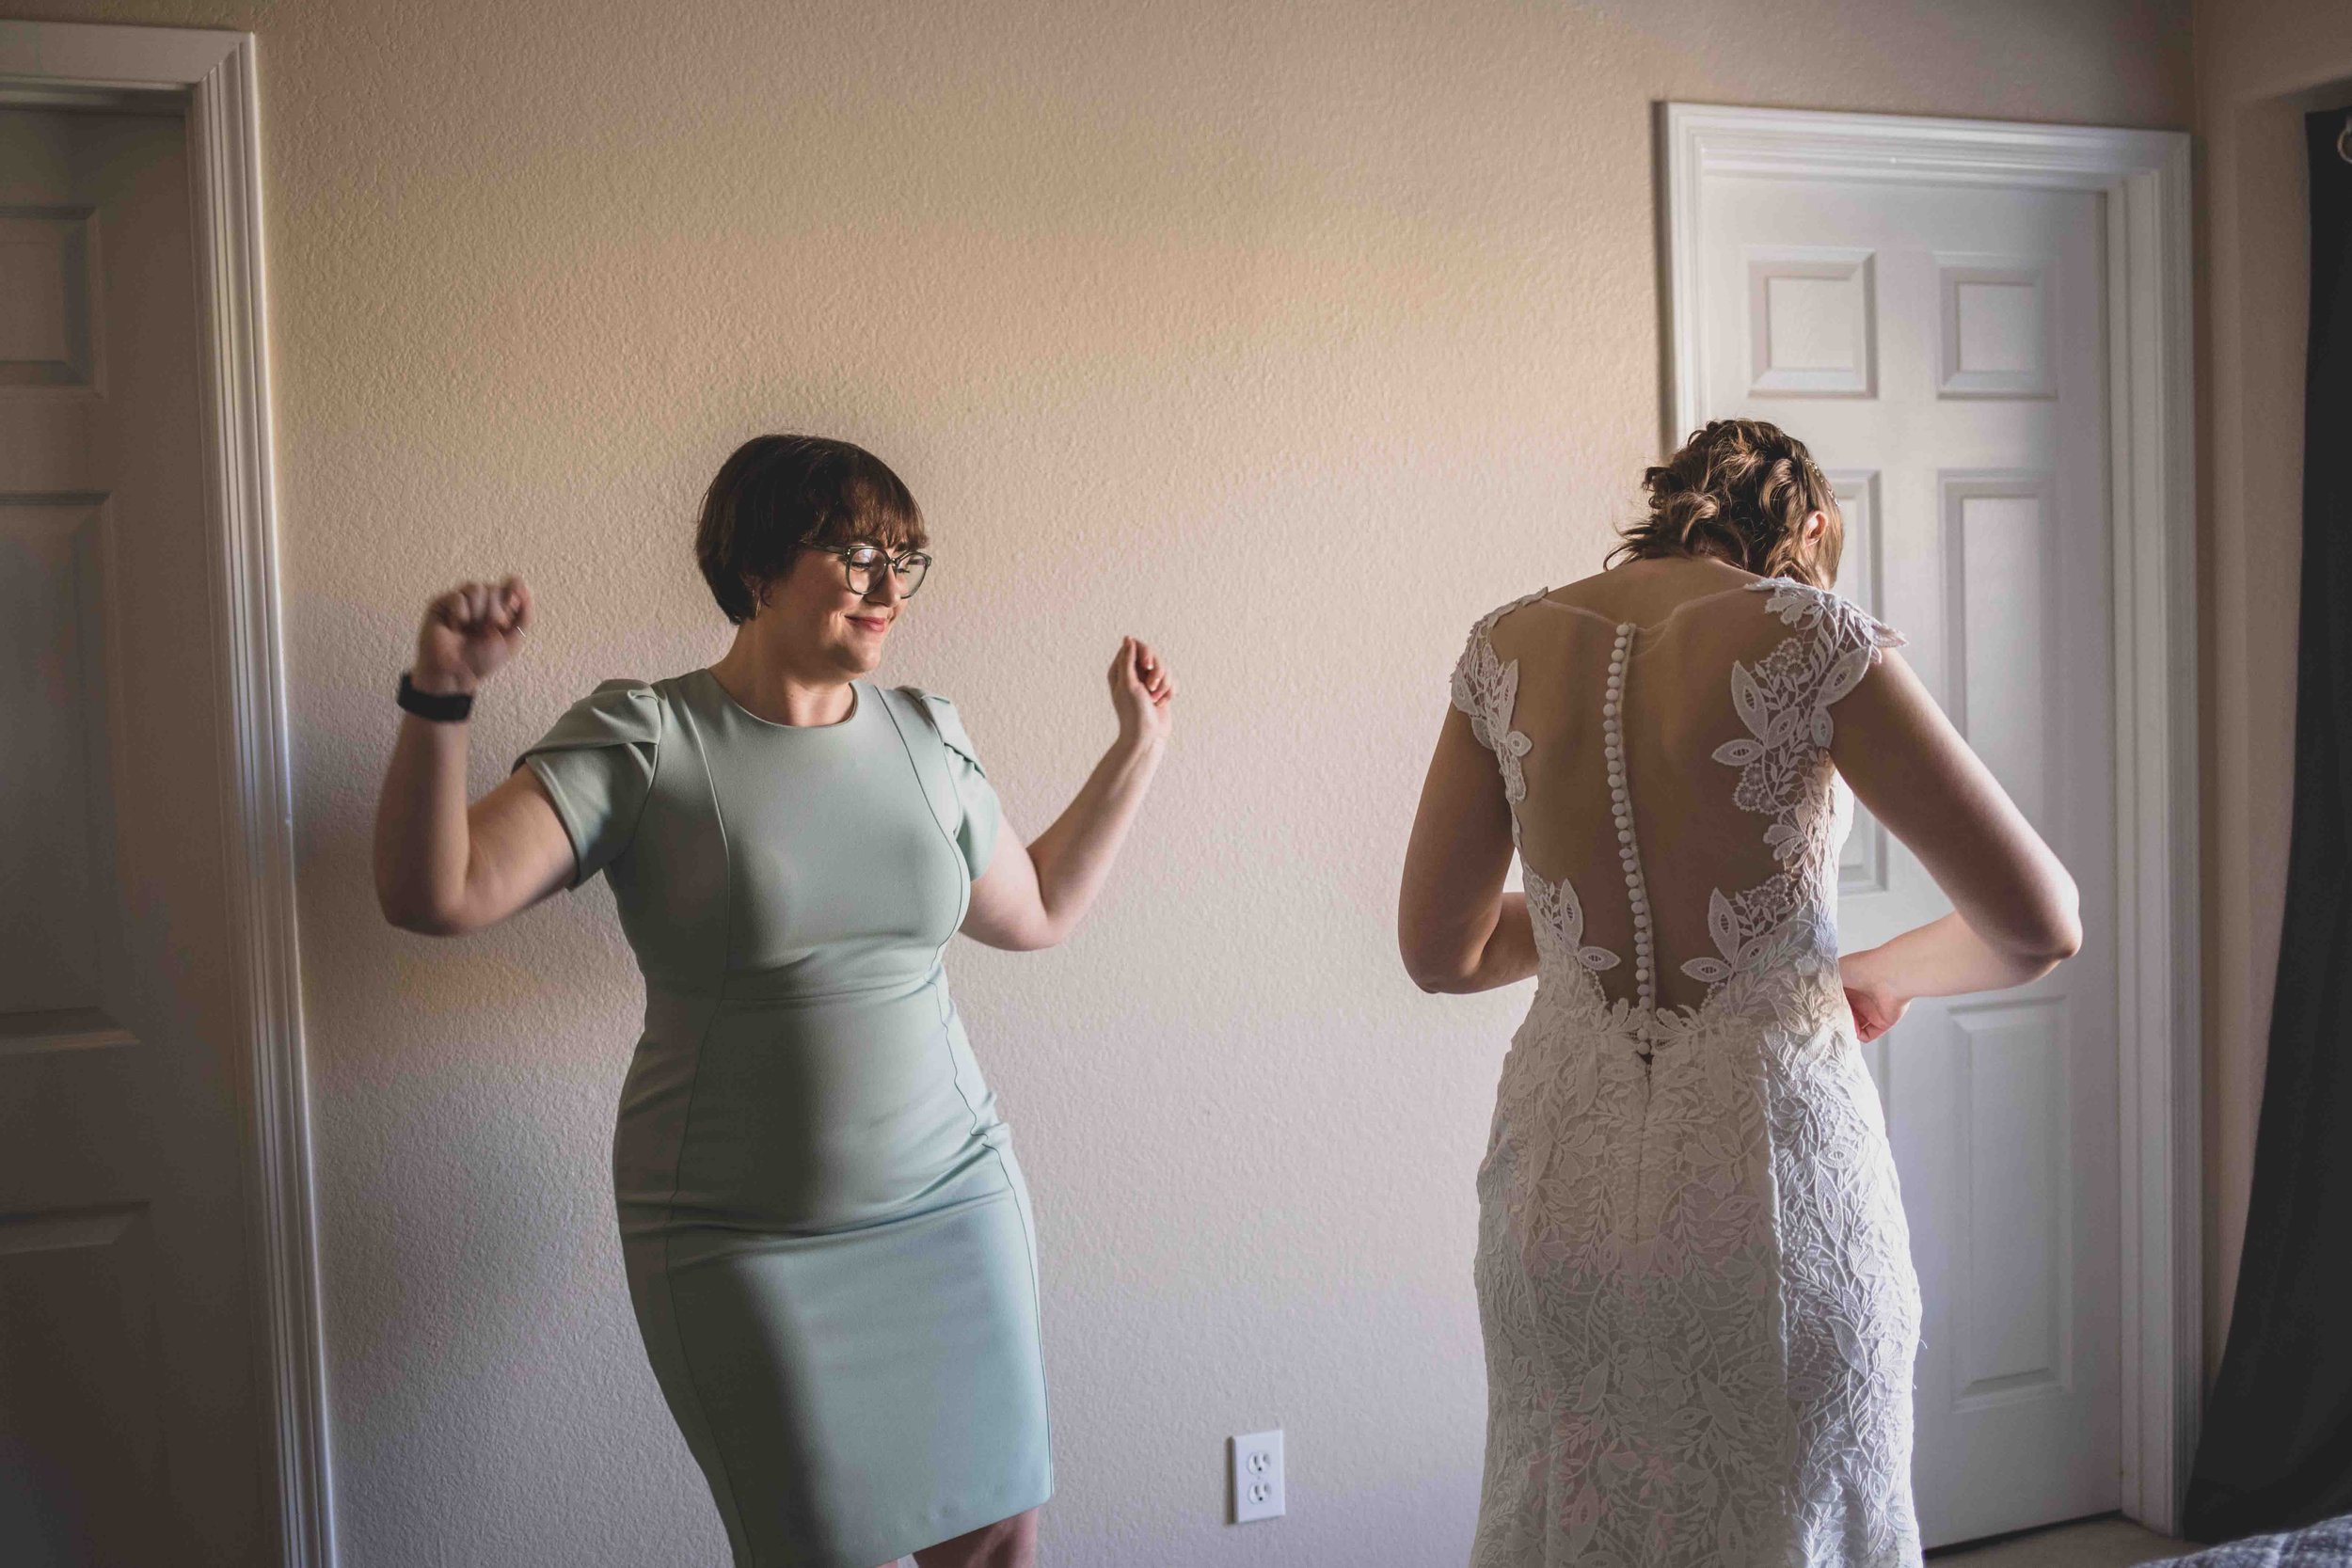  Maid of Honor helping Bride get ready  for her wedding day by Gilbert Wedding Photographer Jennifer Lind Schutsky. 